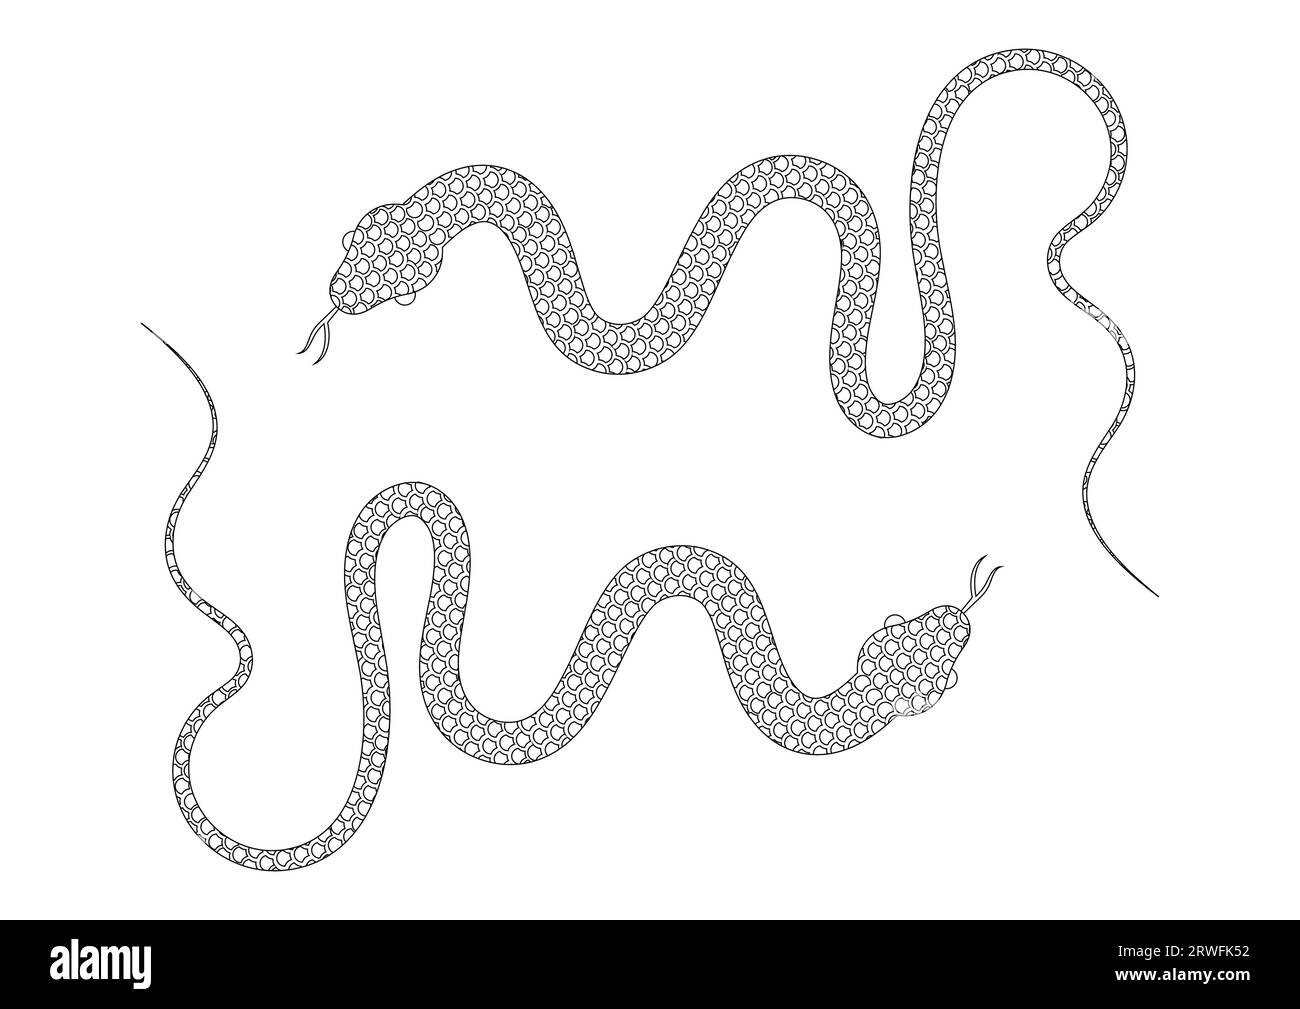 Black and White Snake Vector Illustration. Coloring Page of Two Snakes Stock Vector